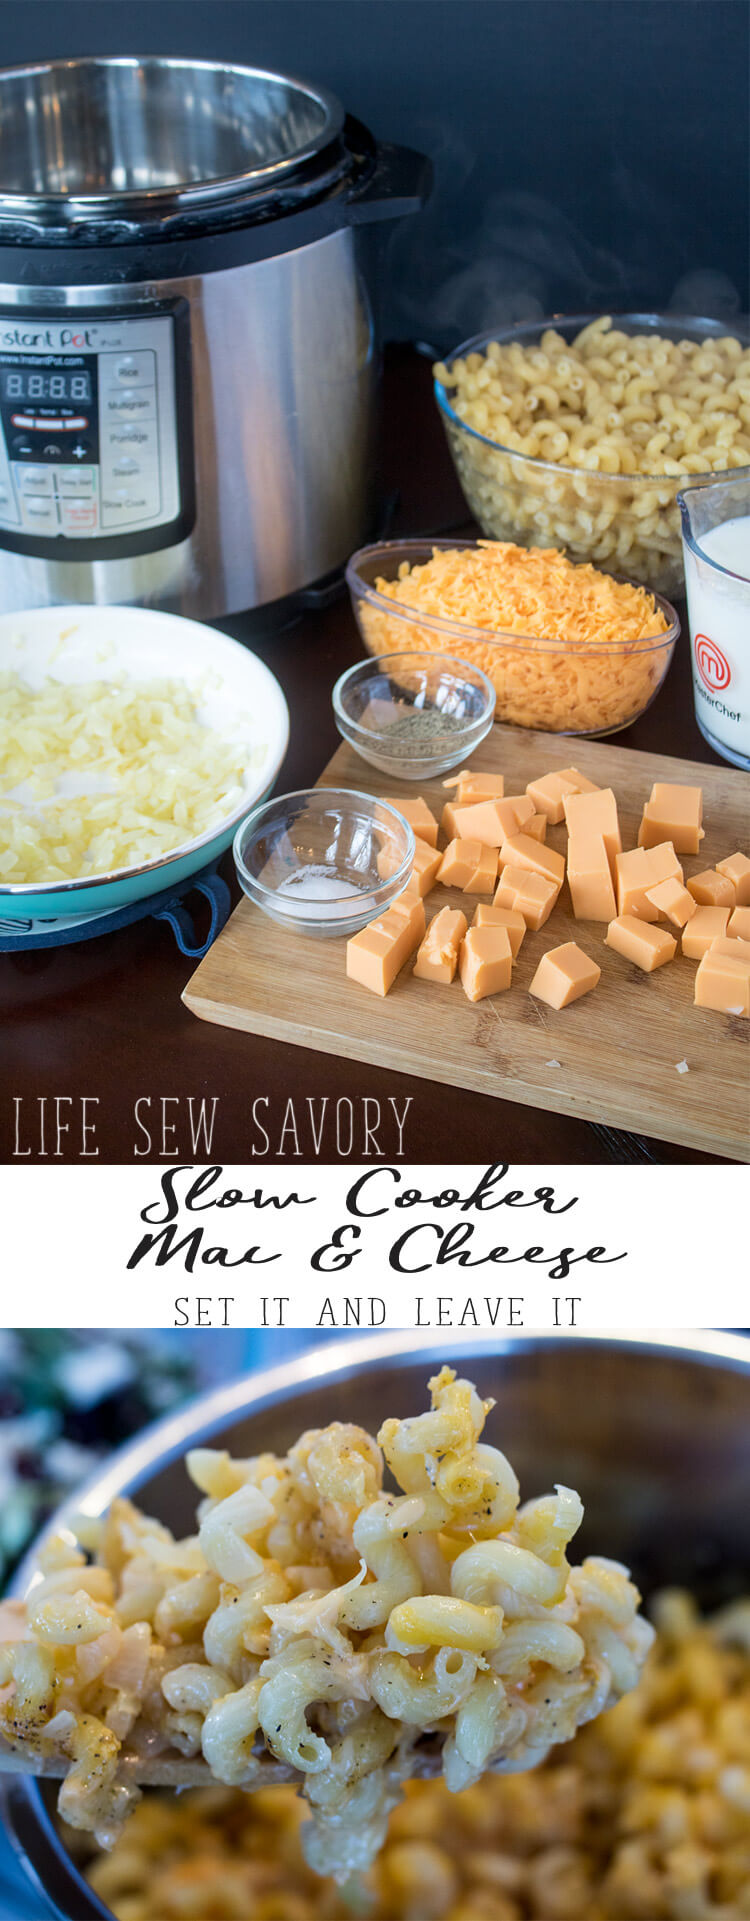 Slow cooker Mac and Cheese recipe from Life Sew Savory